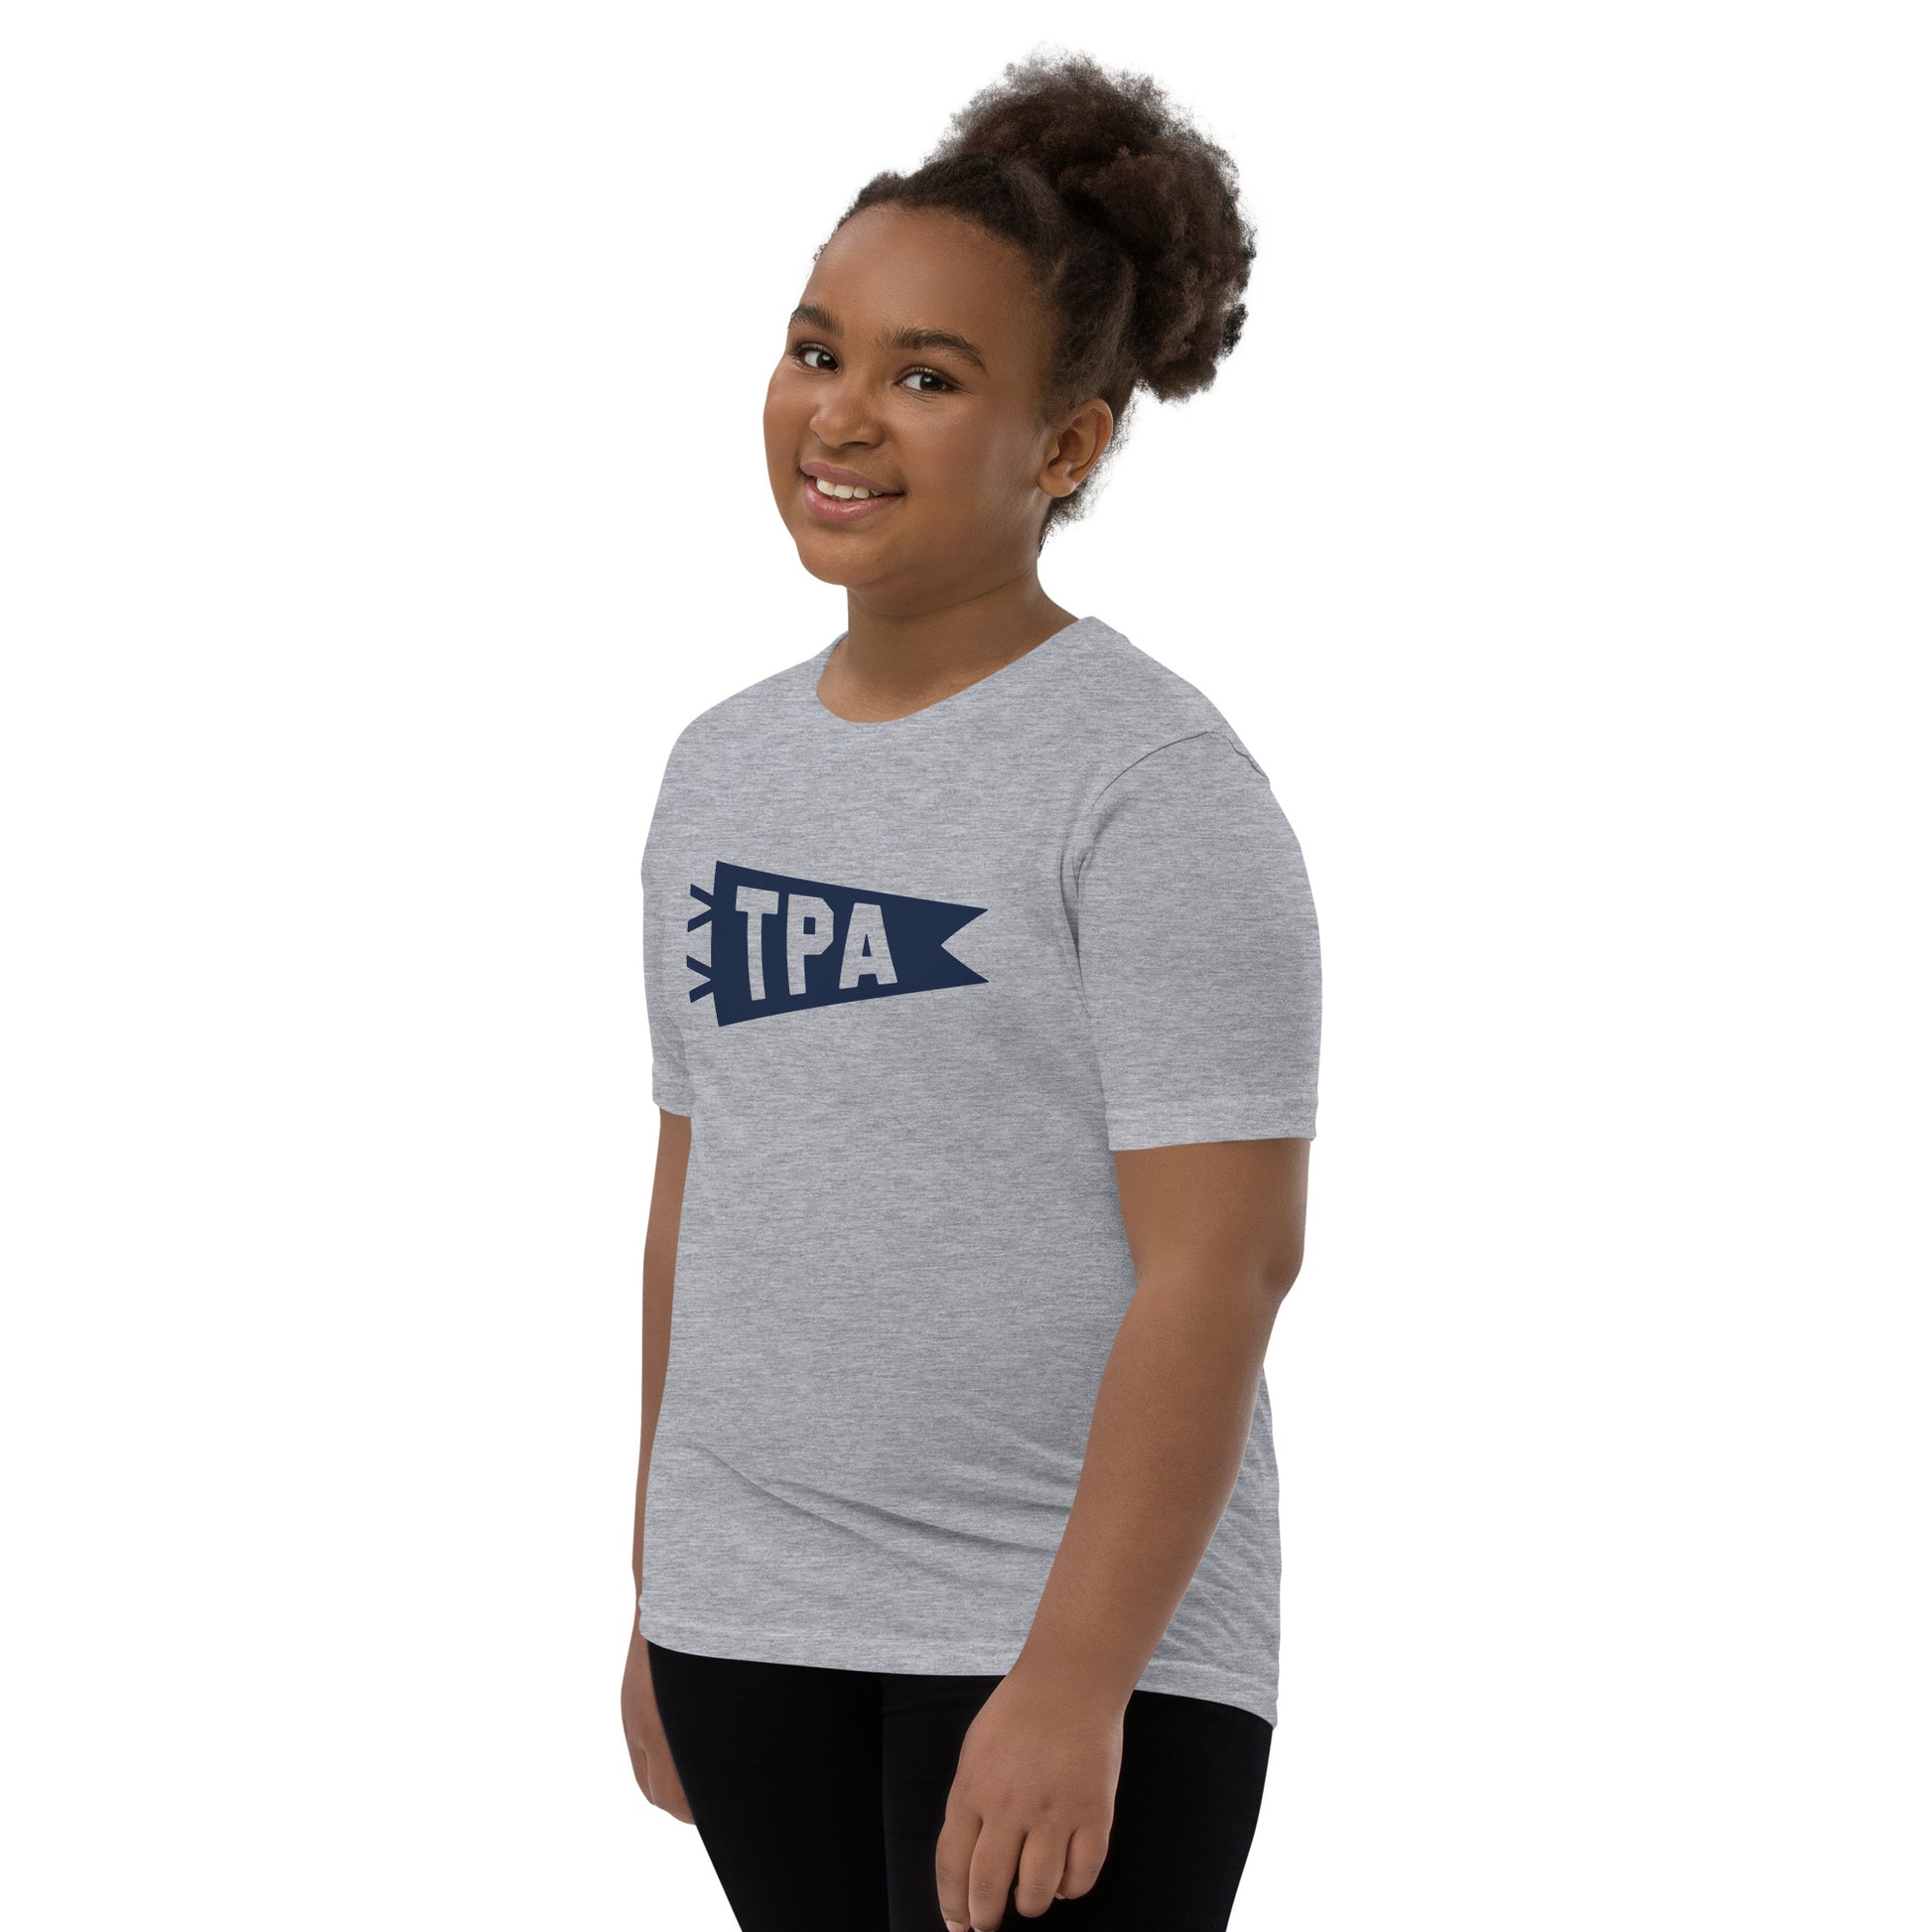 Kid's Airport Code Tee - Navy Blue Graphic • TPA Tampa • YHM Designs - Image 04